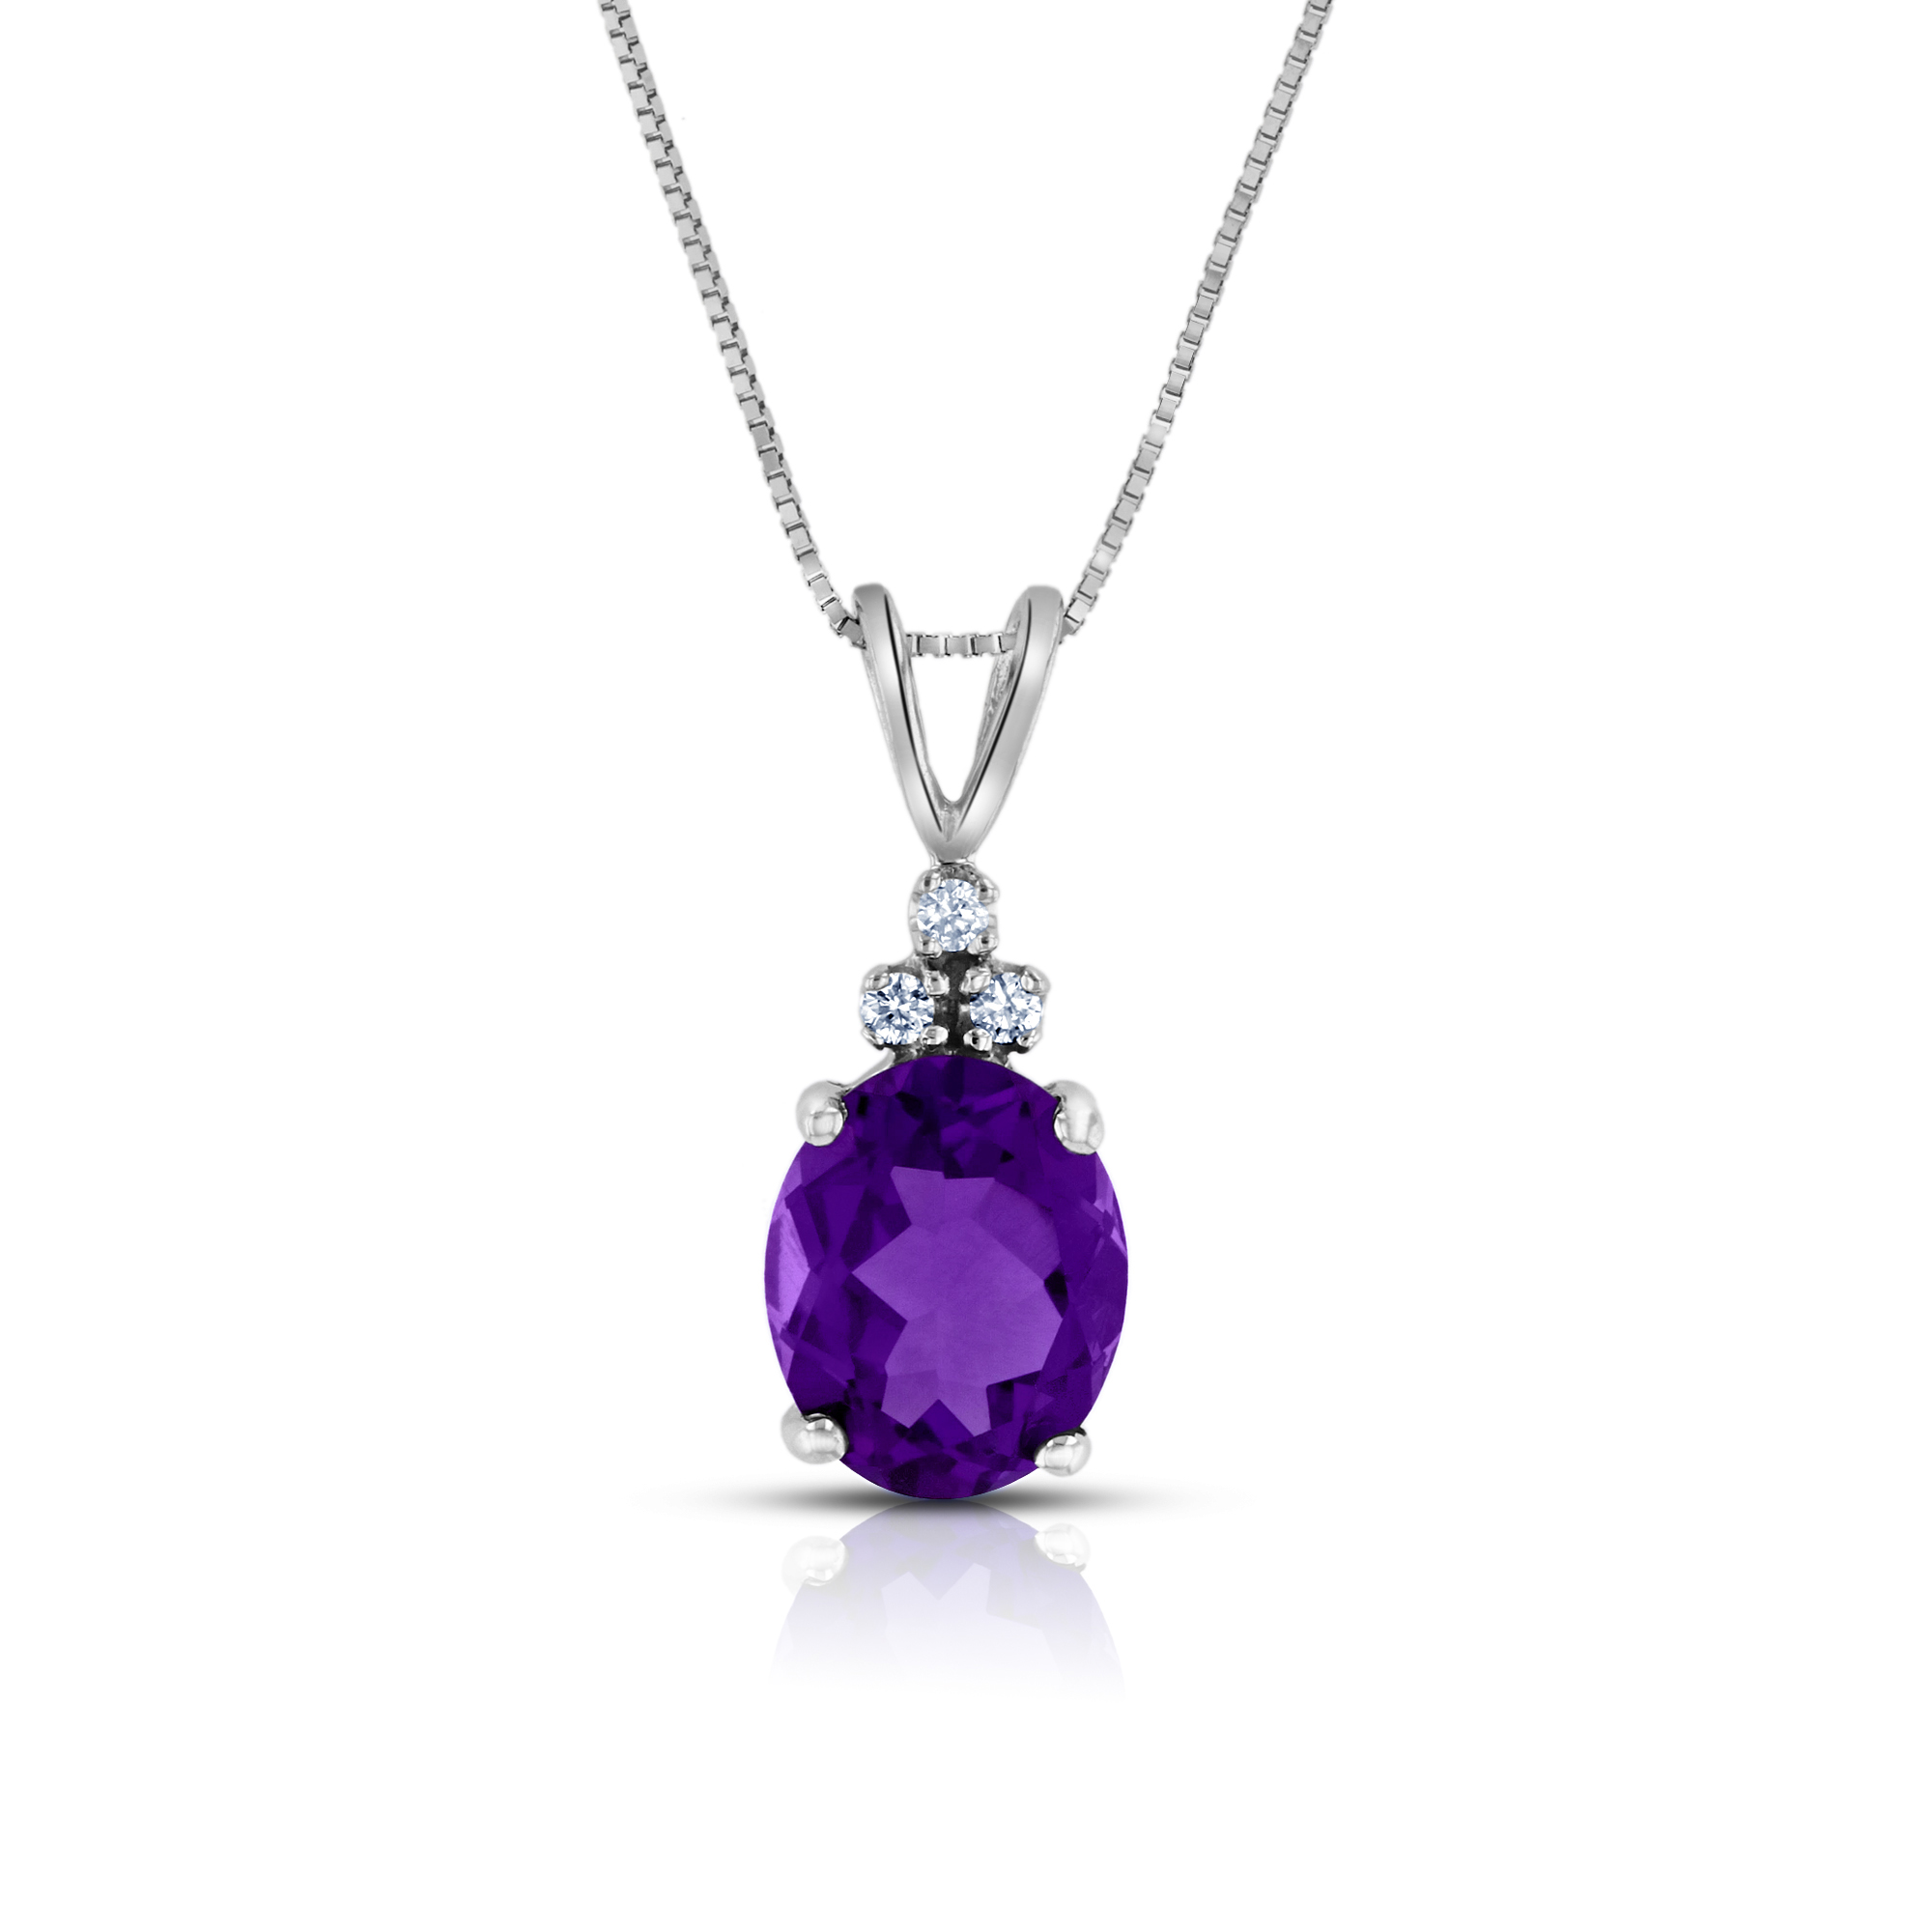 View 0.04ctw Diamond and Amethyst Pendant in 14k White Gold